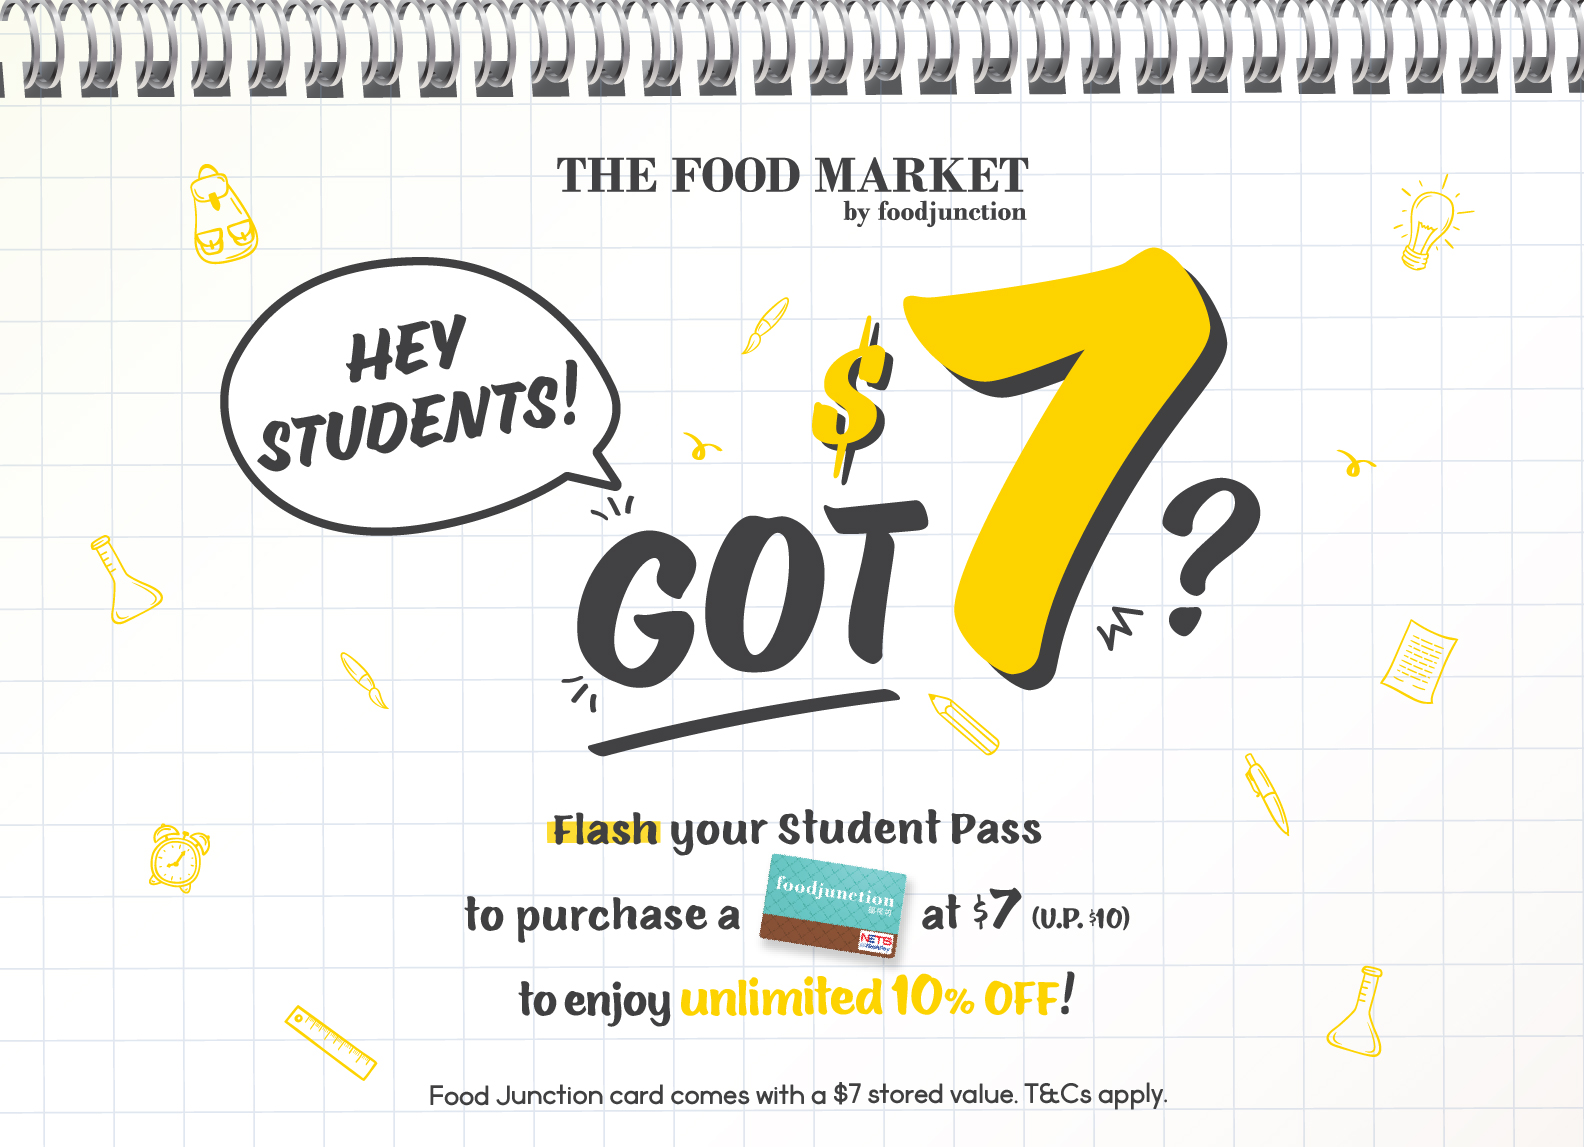 The Food Market Student Promotion